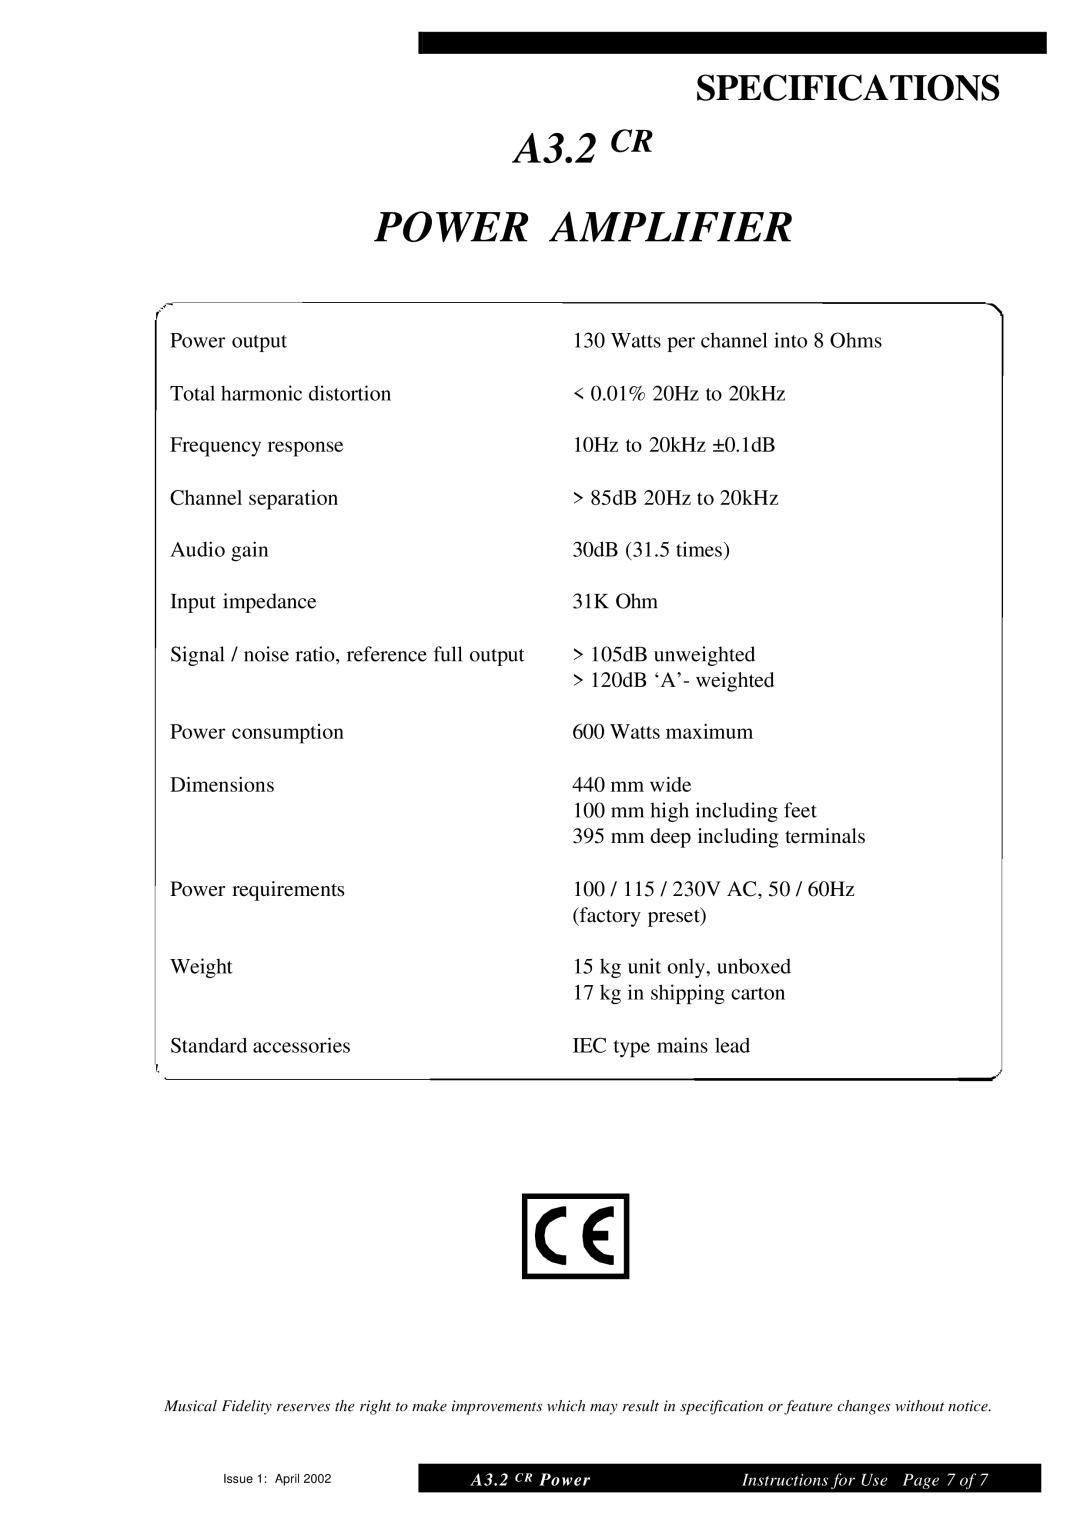 Musical Fidelity manual Specifications, A3.2 CR POWER AMPLIFIER 